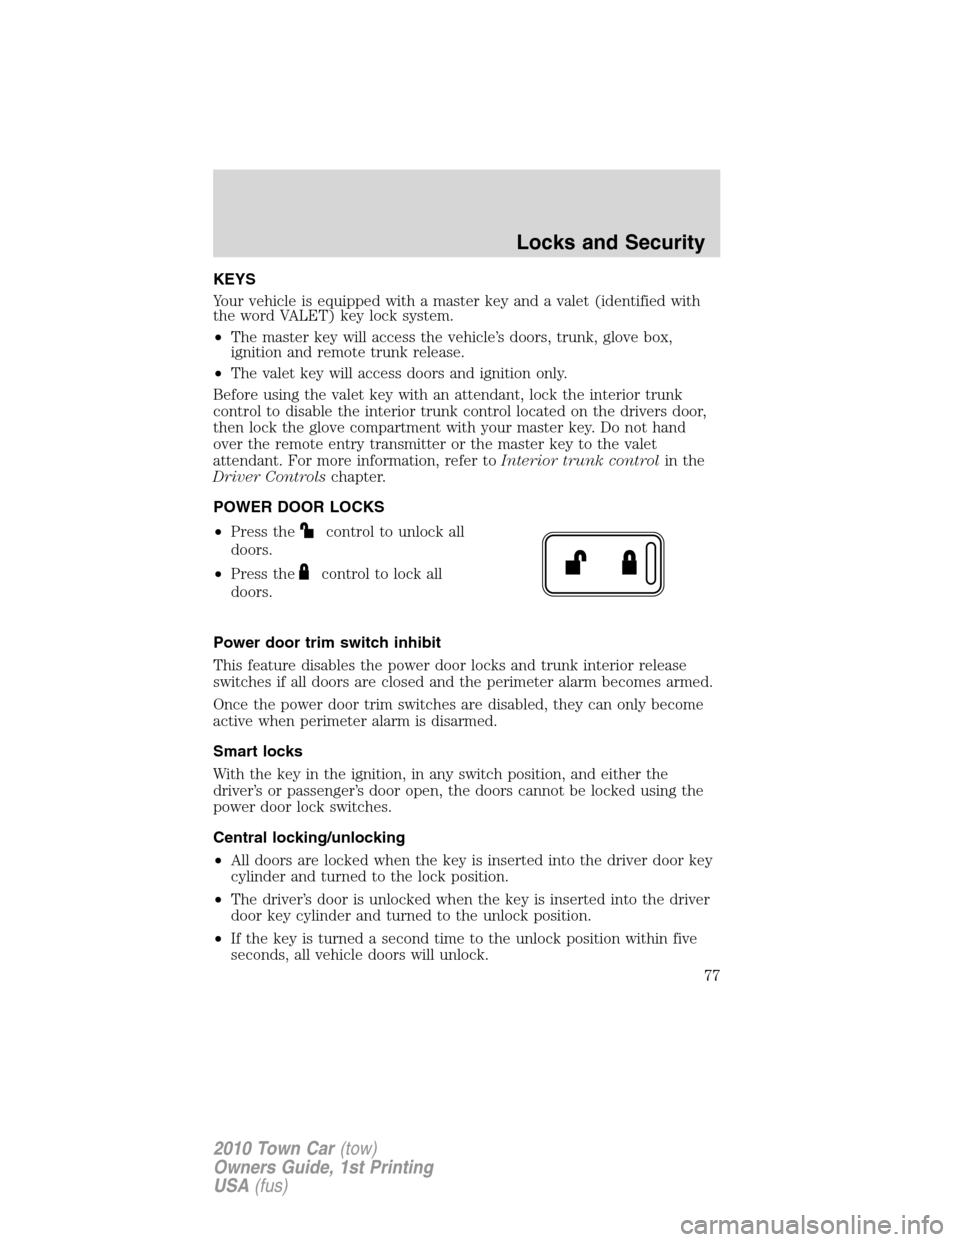 LINCOLN TOWN CAR 2010  Owners Manual KEYS
Your vehicle is equipped with a master key and a valet (identified with
the word VALET) key lock system.
•The master key will access the vehicle’s doors, trunk, glove box,
ignition and remote